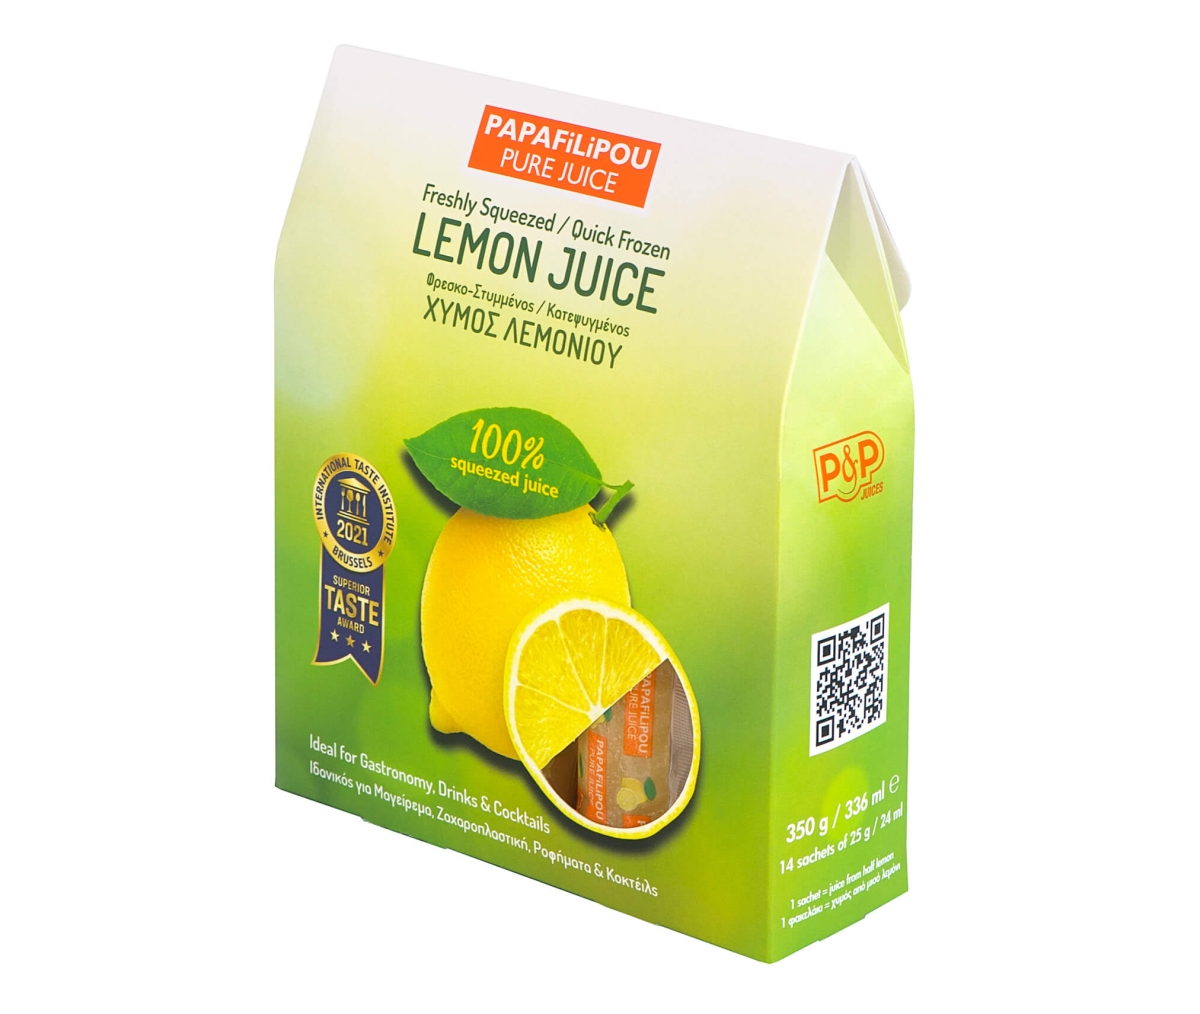 Papafilipou freshly squeezed quick frozen lemon juice for food, beverage and cooking